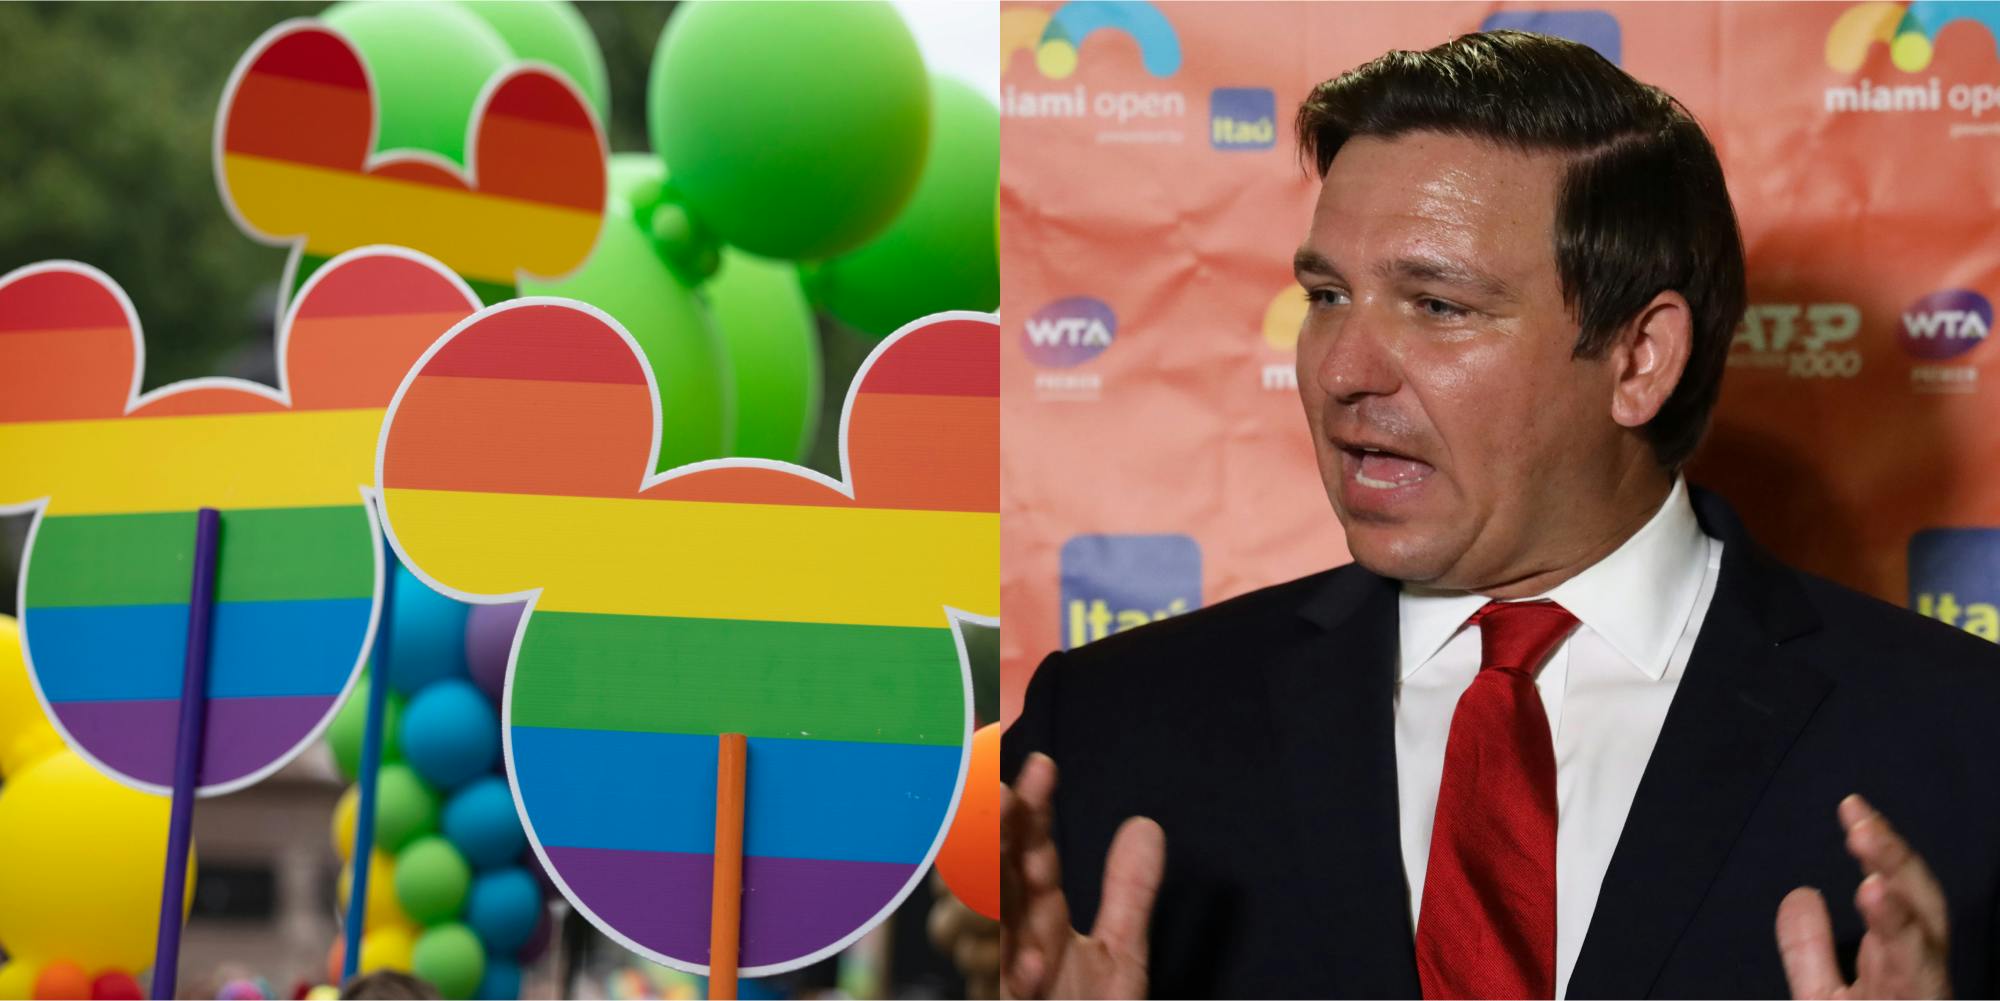 Disney Mickey Mouse head shapes with pride colors outside (l) Ron DeSantis speaking looking left (r)